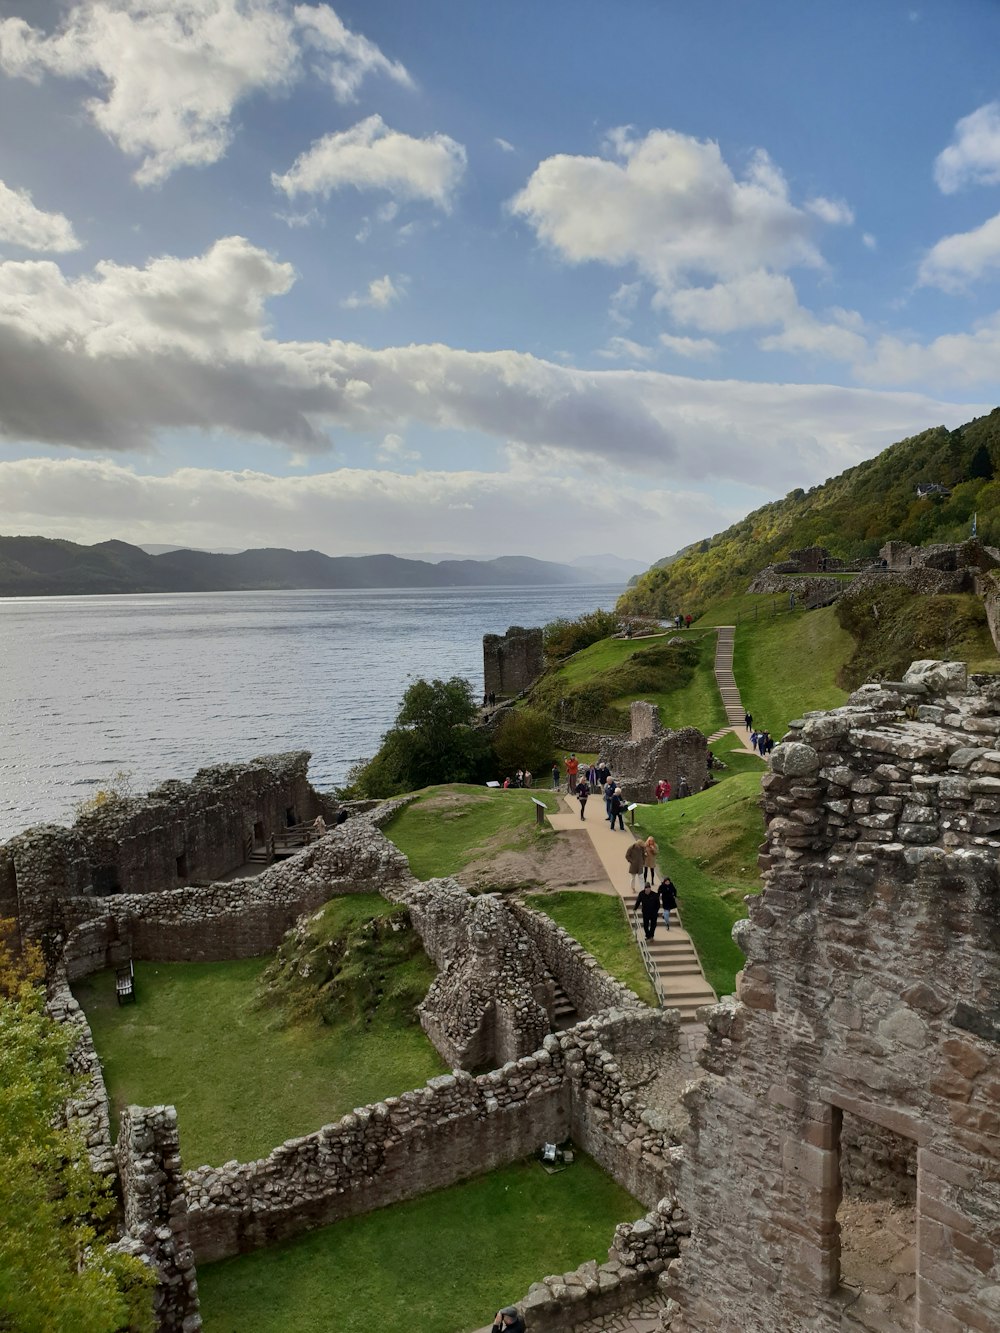 a stone wall with a walkway and people walking on it by a body of water with Urquhart Castle in the background